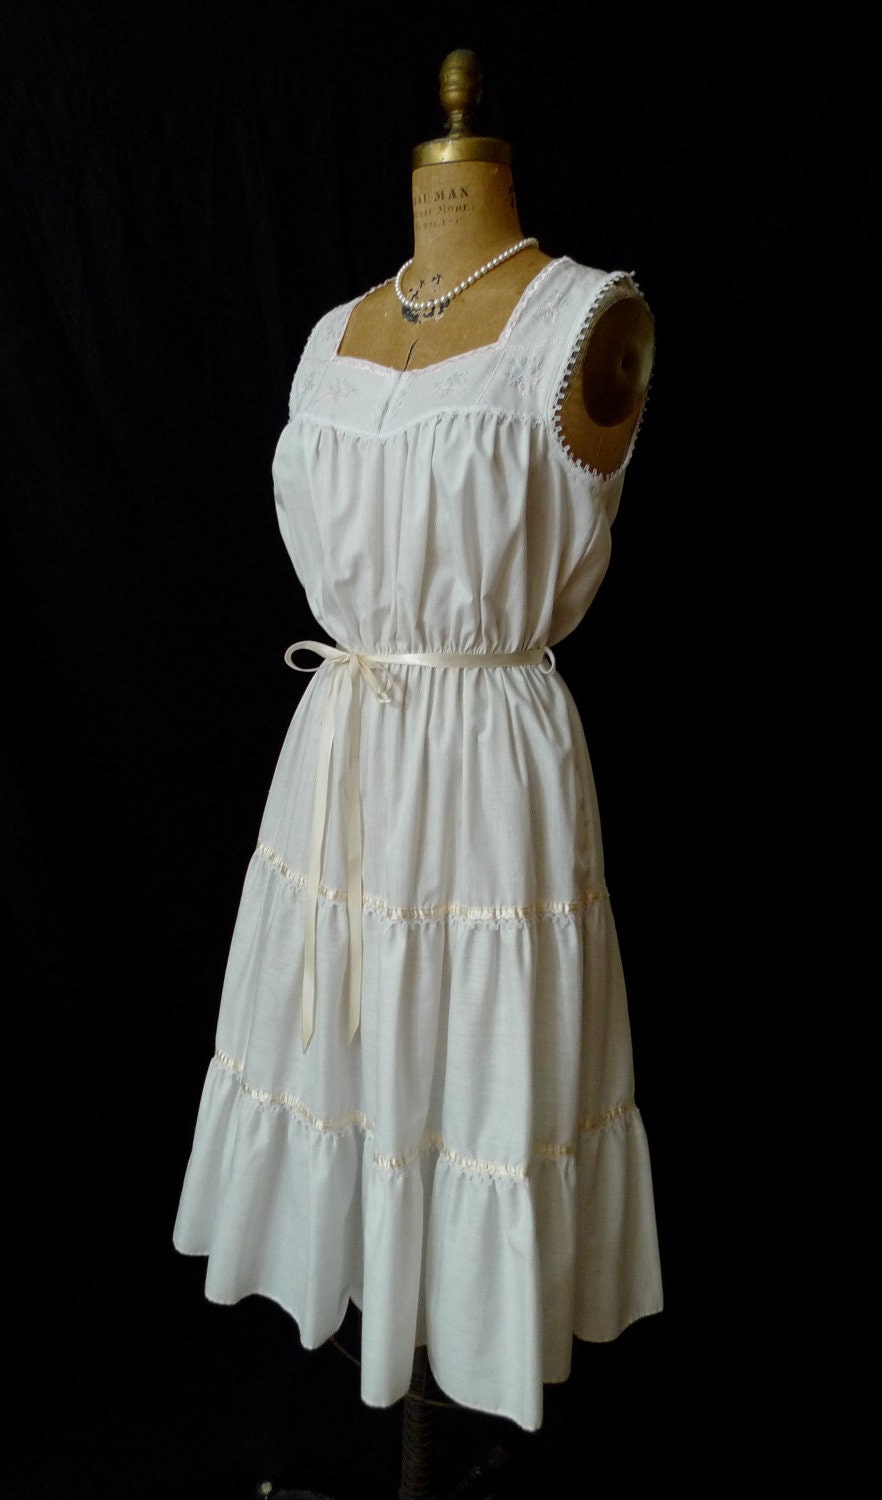 Vintage 70s White Peasant Dress with by SpoonbreadVintEdge on Etsy